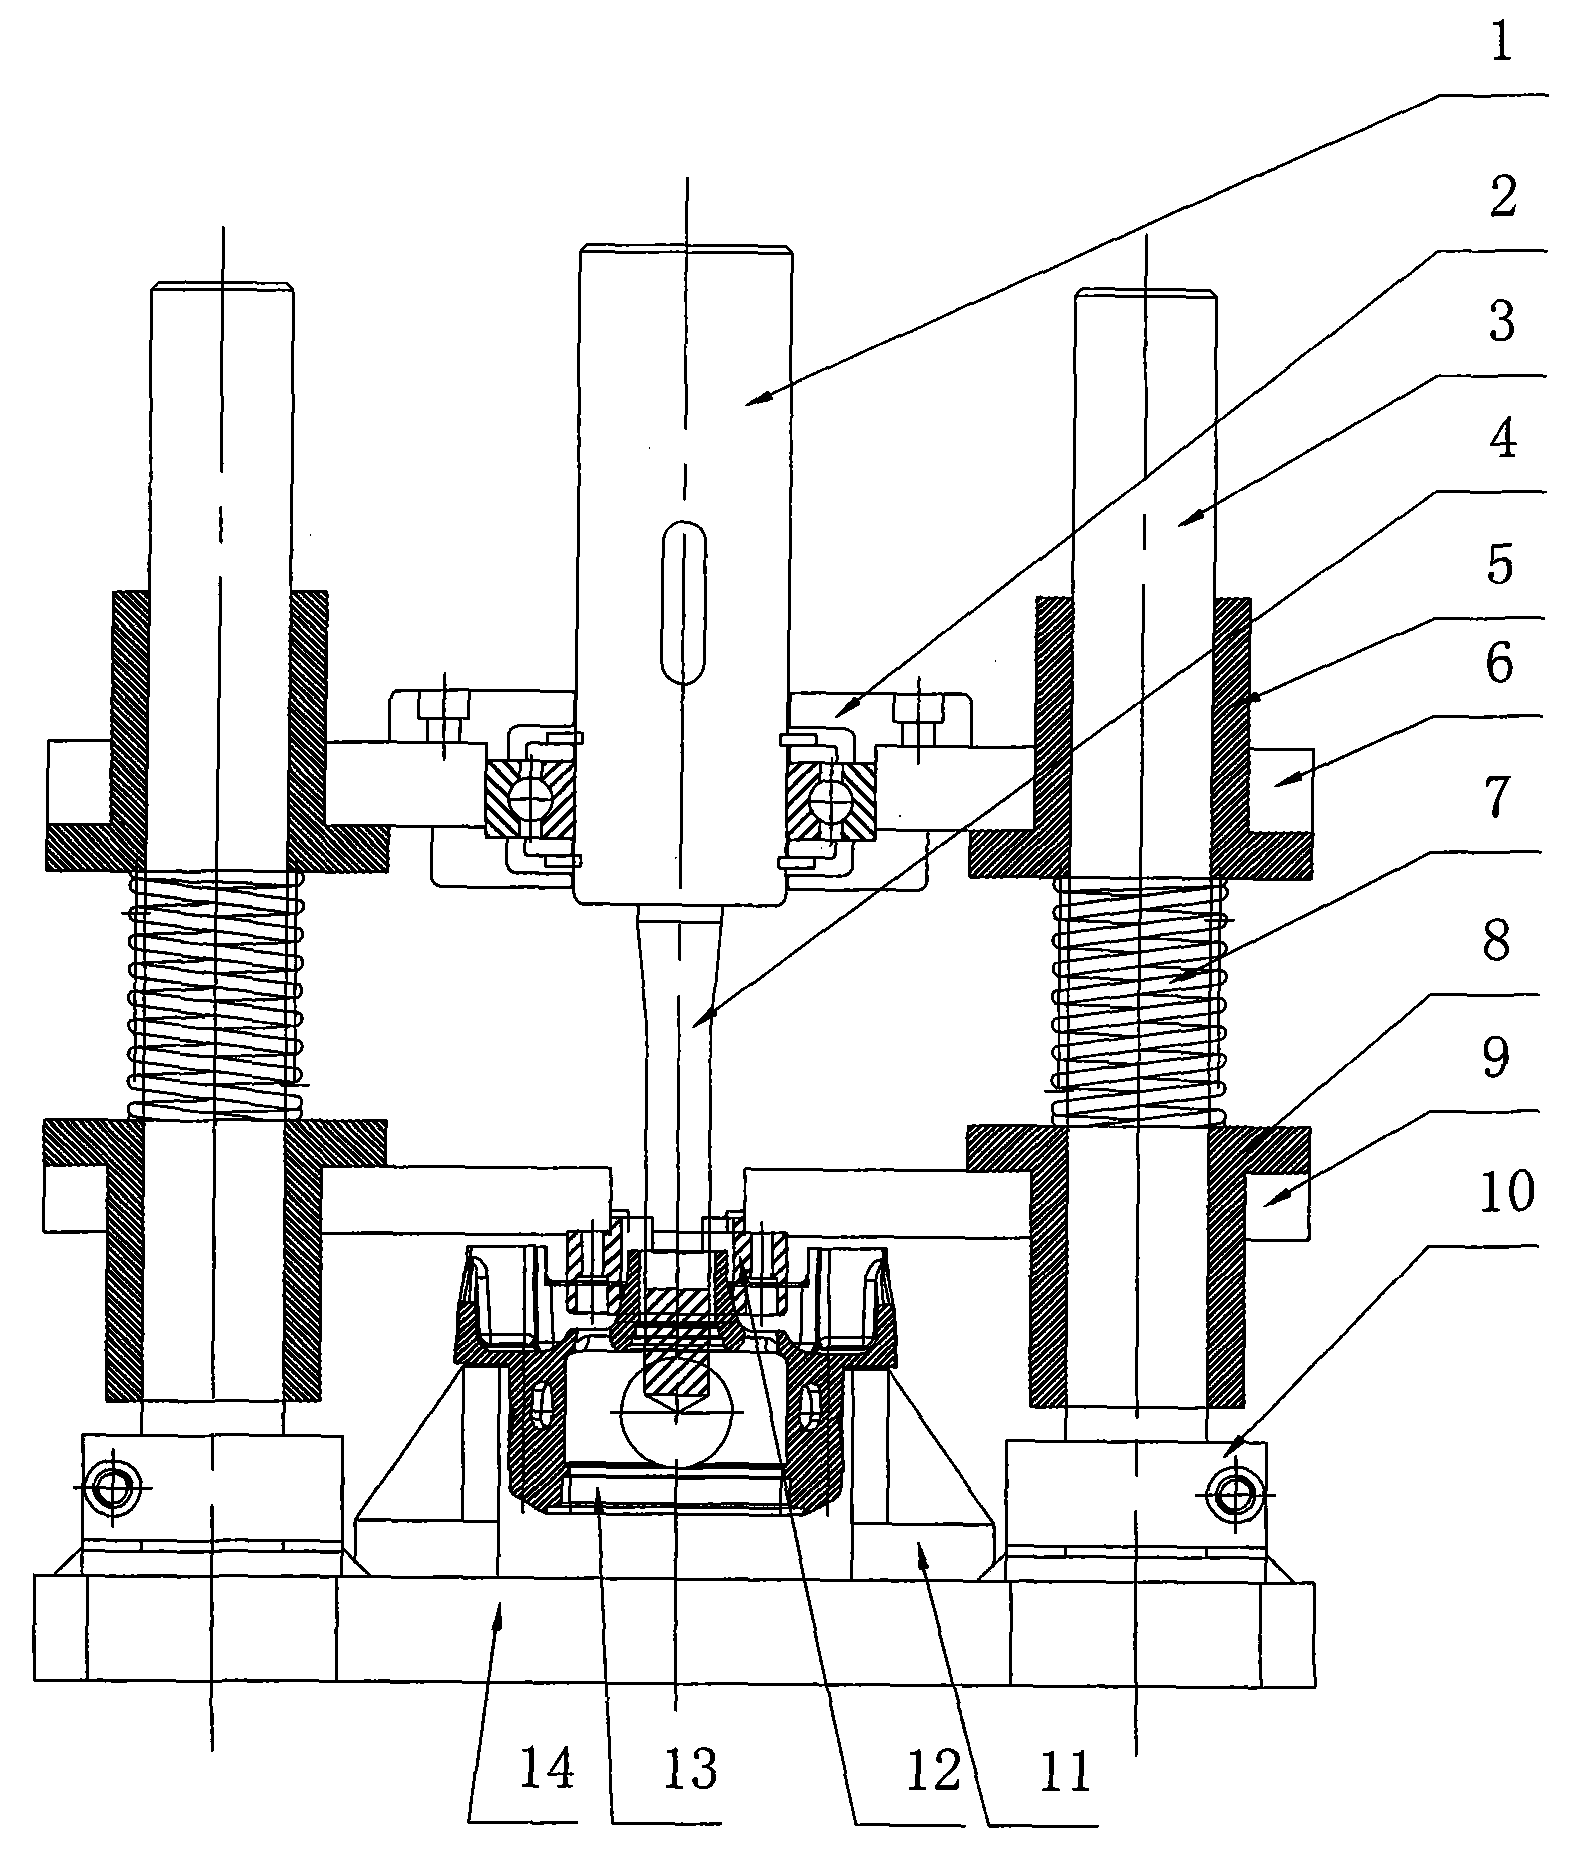 Automatic centering compaction clamp for Danfoss cylinder body